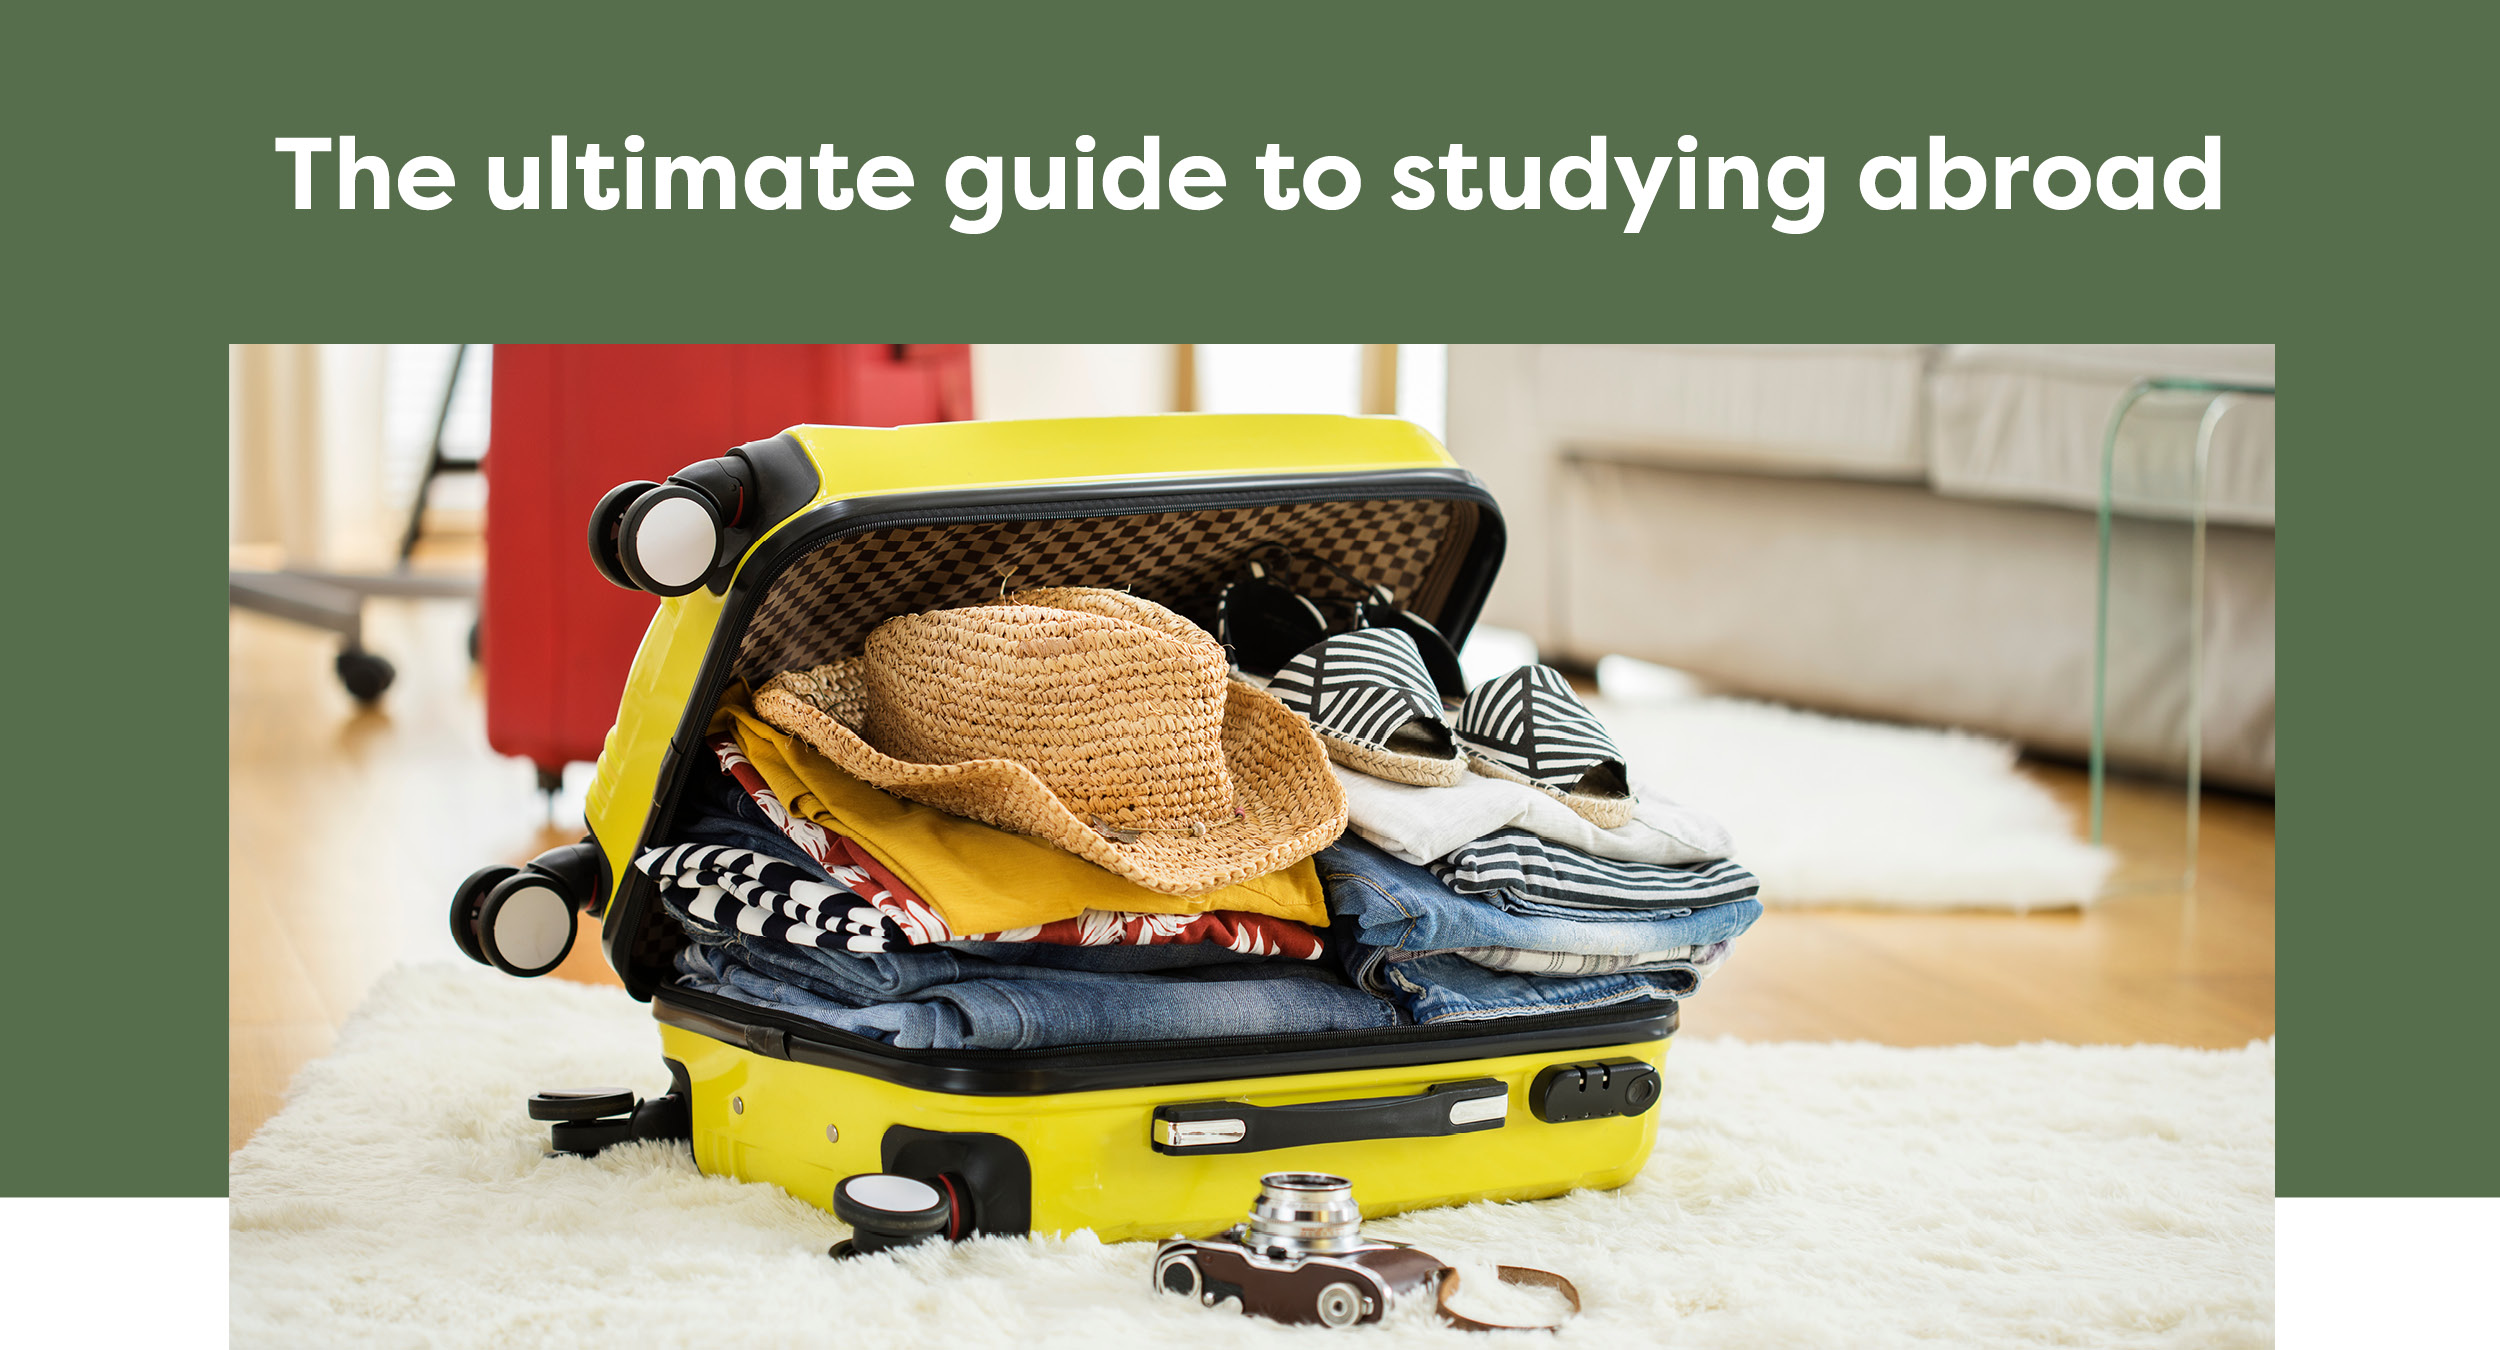 The ultimate guide to studying abroad